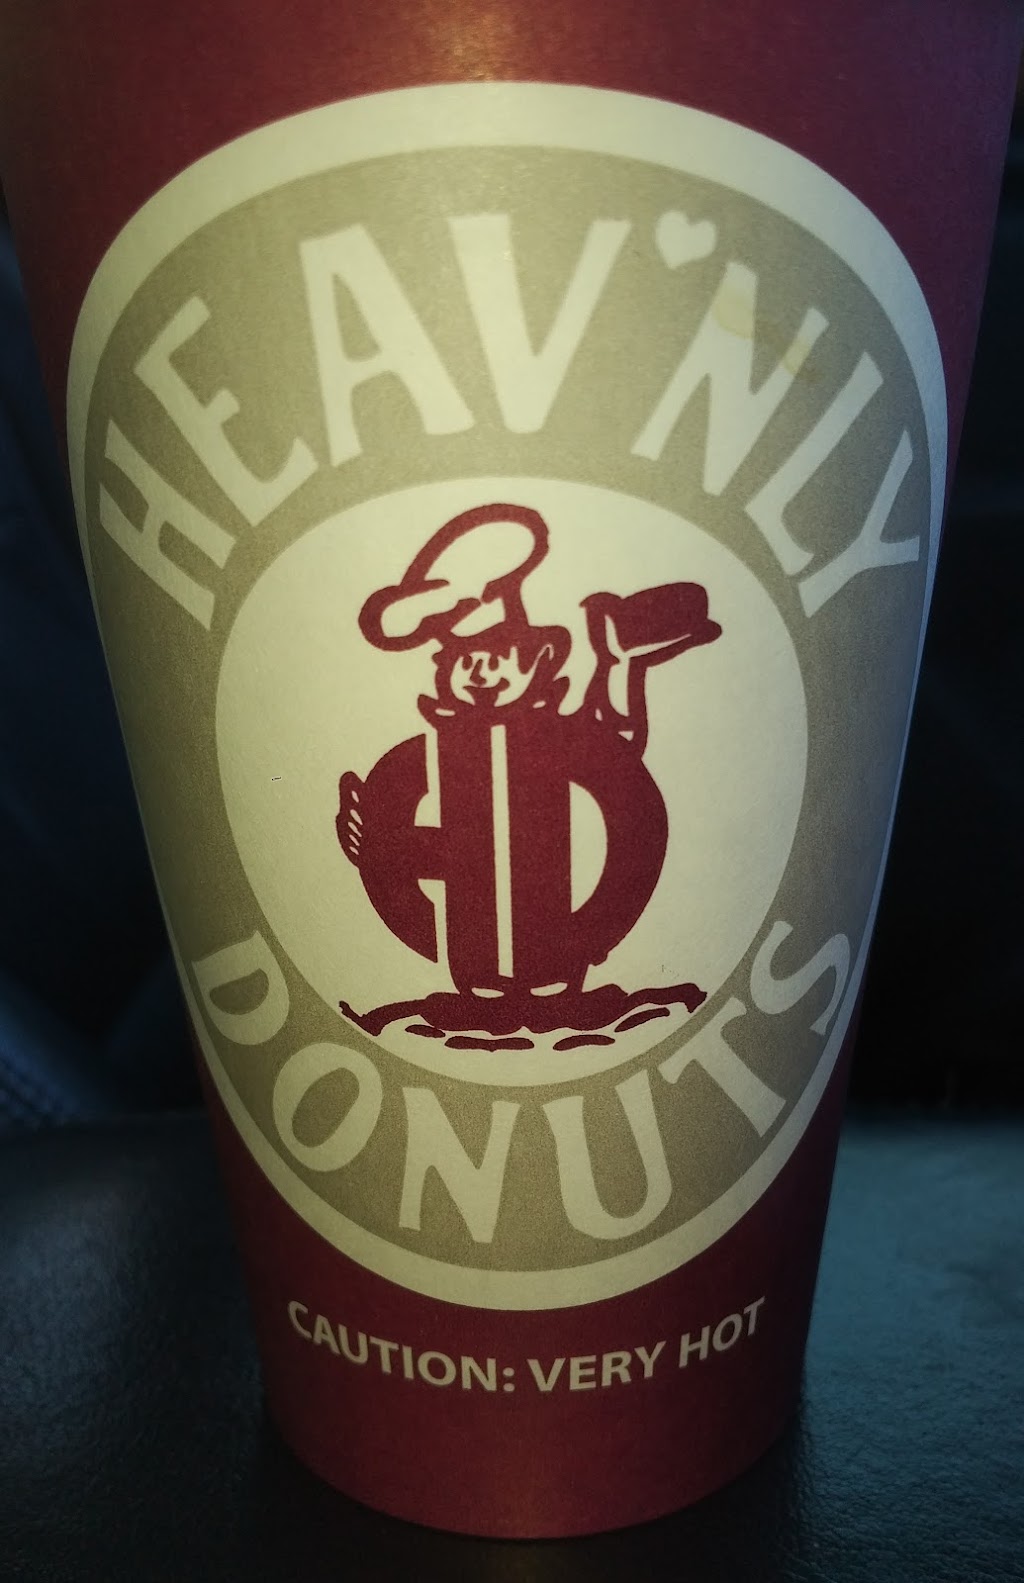 Heavnly Donuts | 658 New Haven Ave, Derby, CT 06418 | Phone: (203) 734-4185